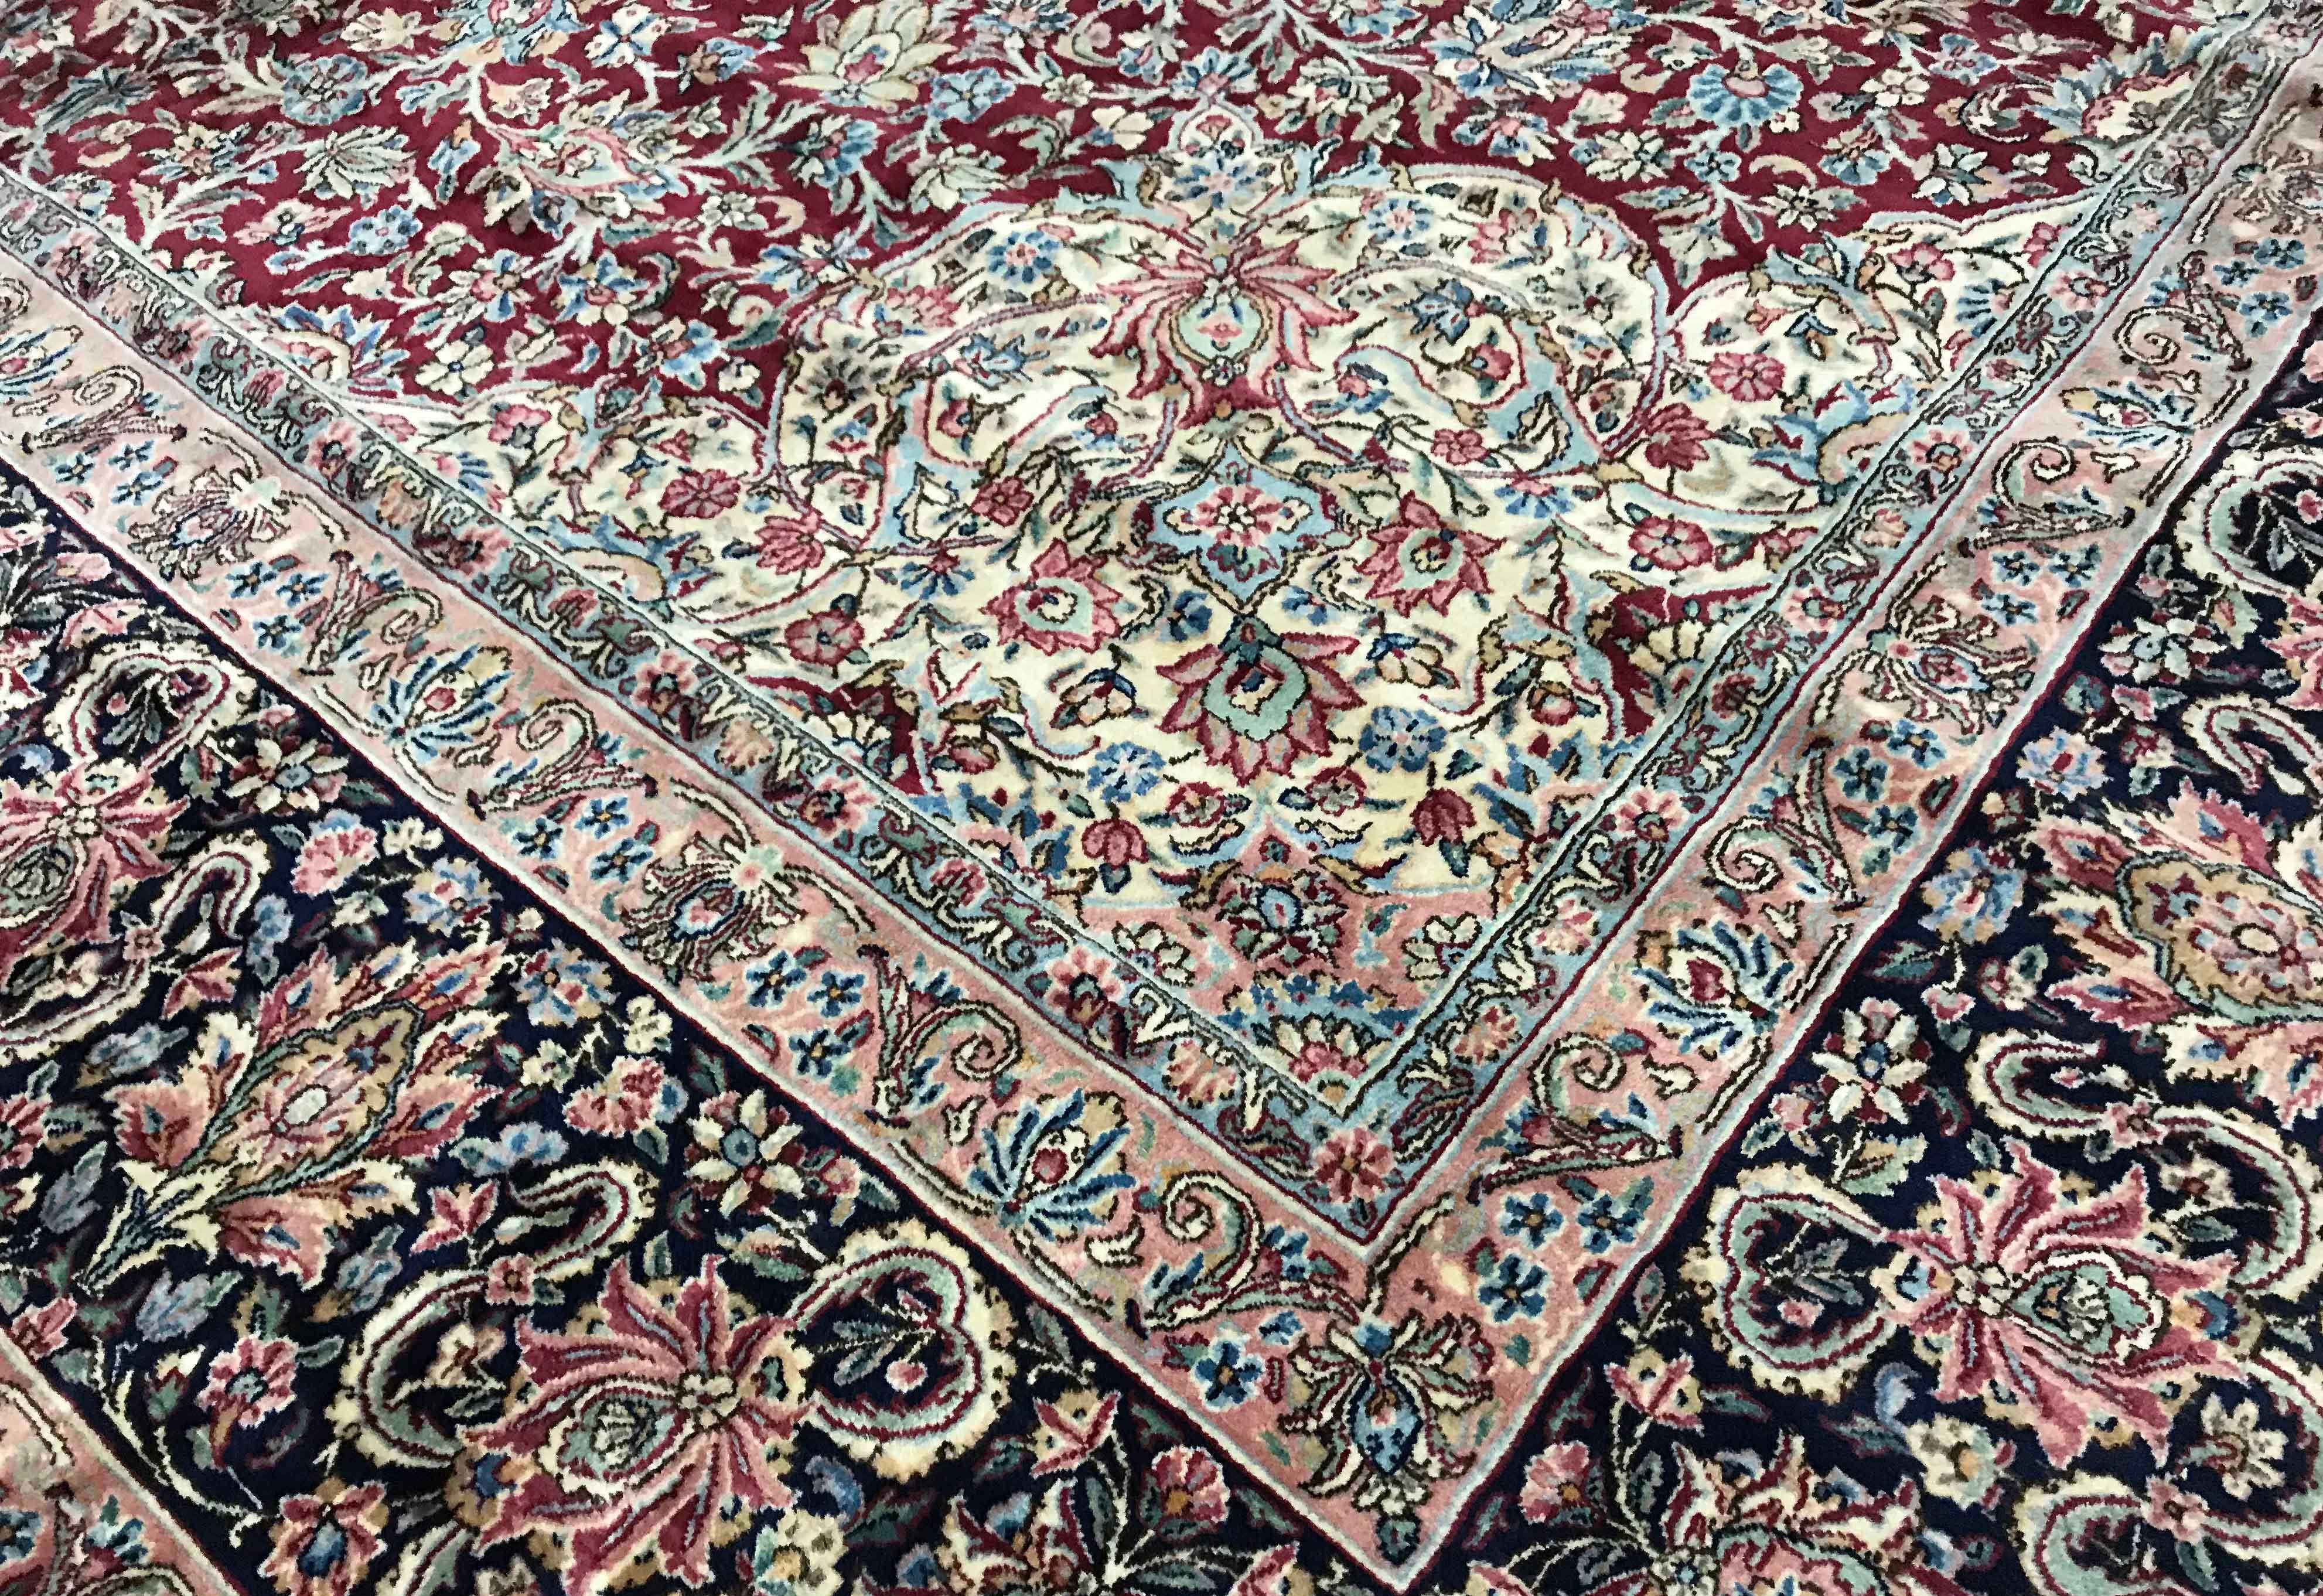 Vintage Persian Kirman, circa 1940. Set on a red ground with a deep navy central design this lovely Kerman has all the requirements one is looking for in a traditional Persian rug. Completed by the main border in dark navy to set the piece off.